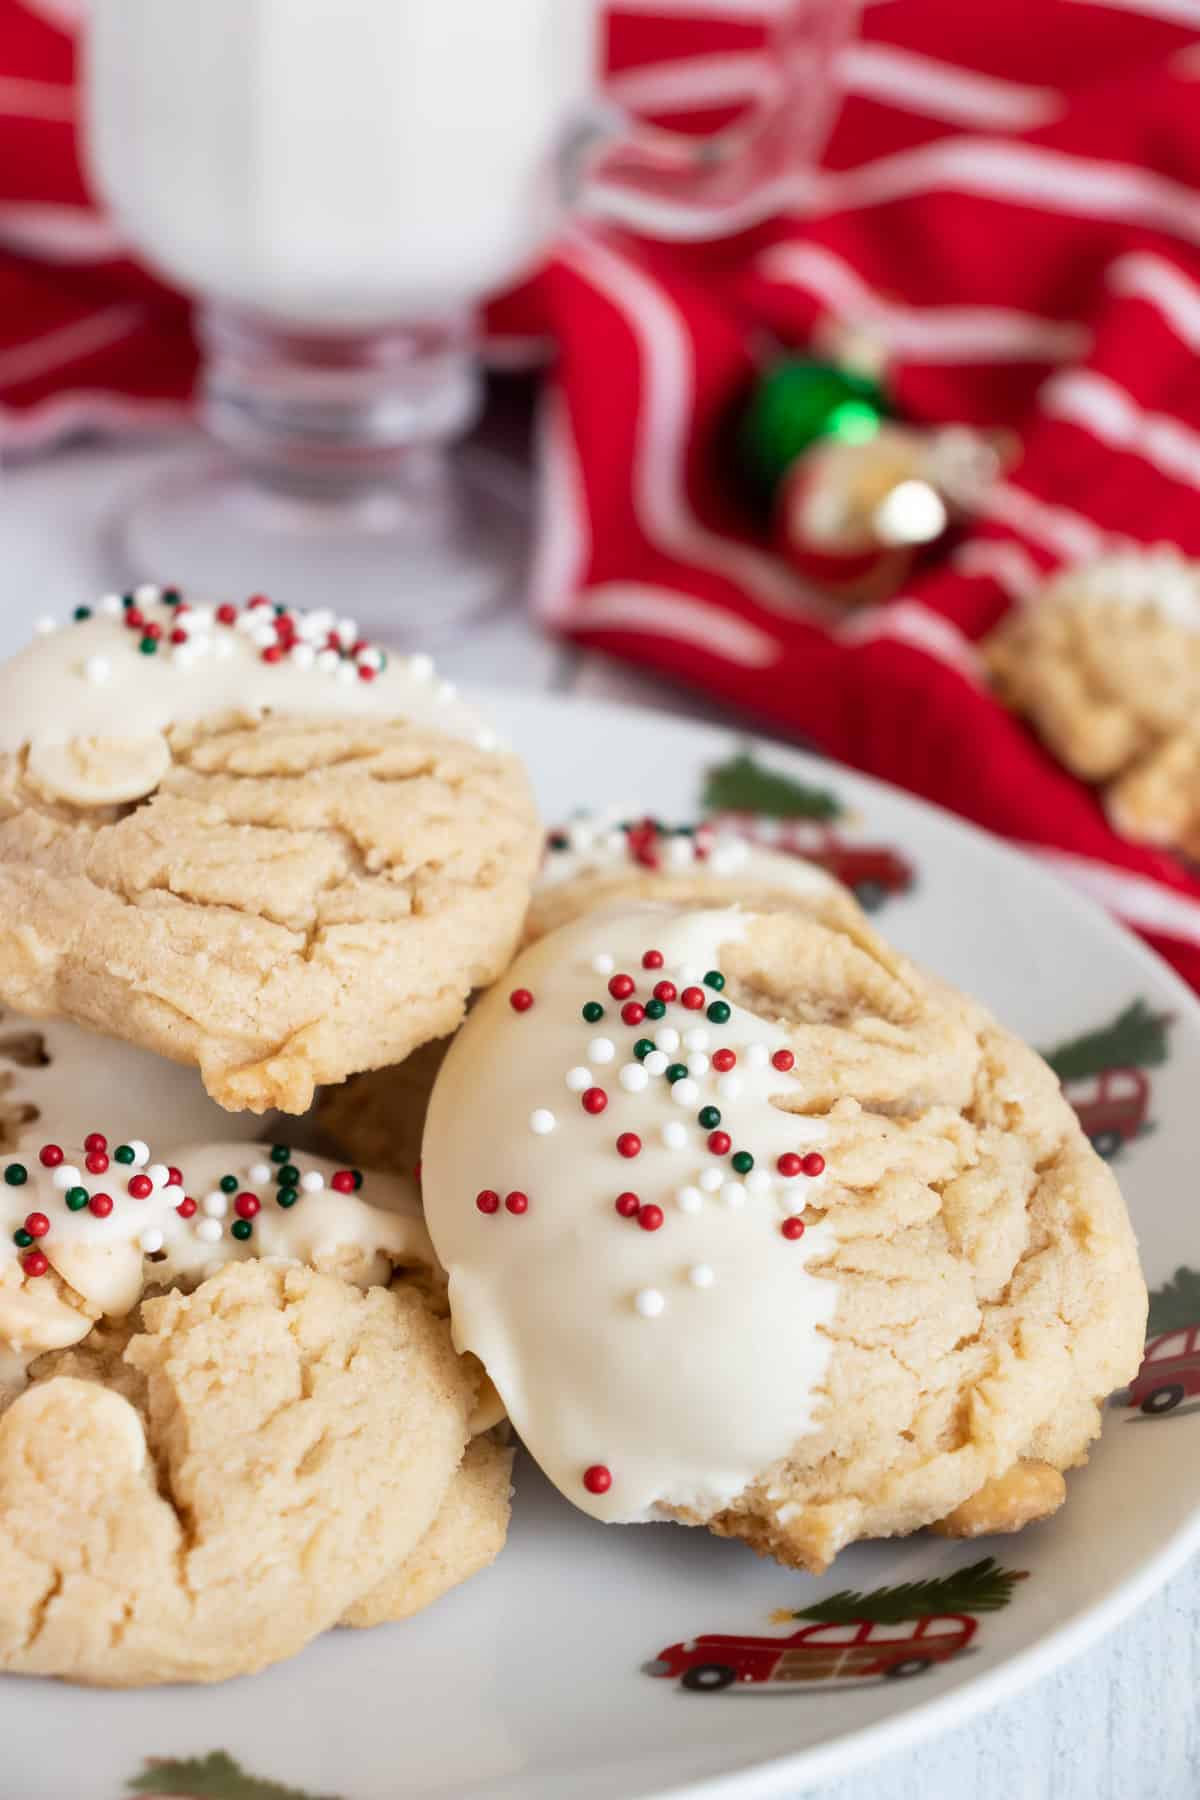 White Chocolate peanut butter cookies dipped in white chocolate with holiday sprinkles